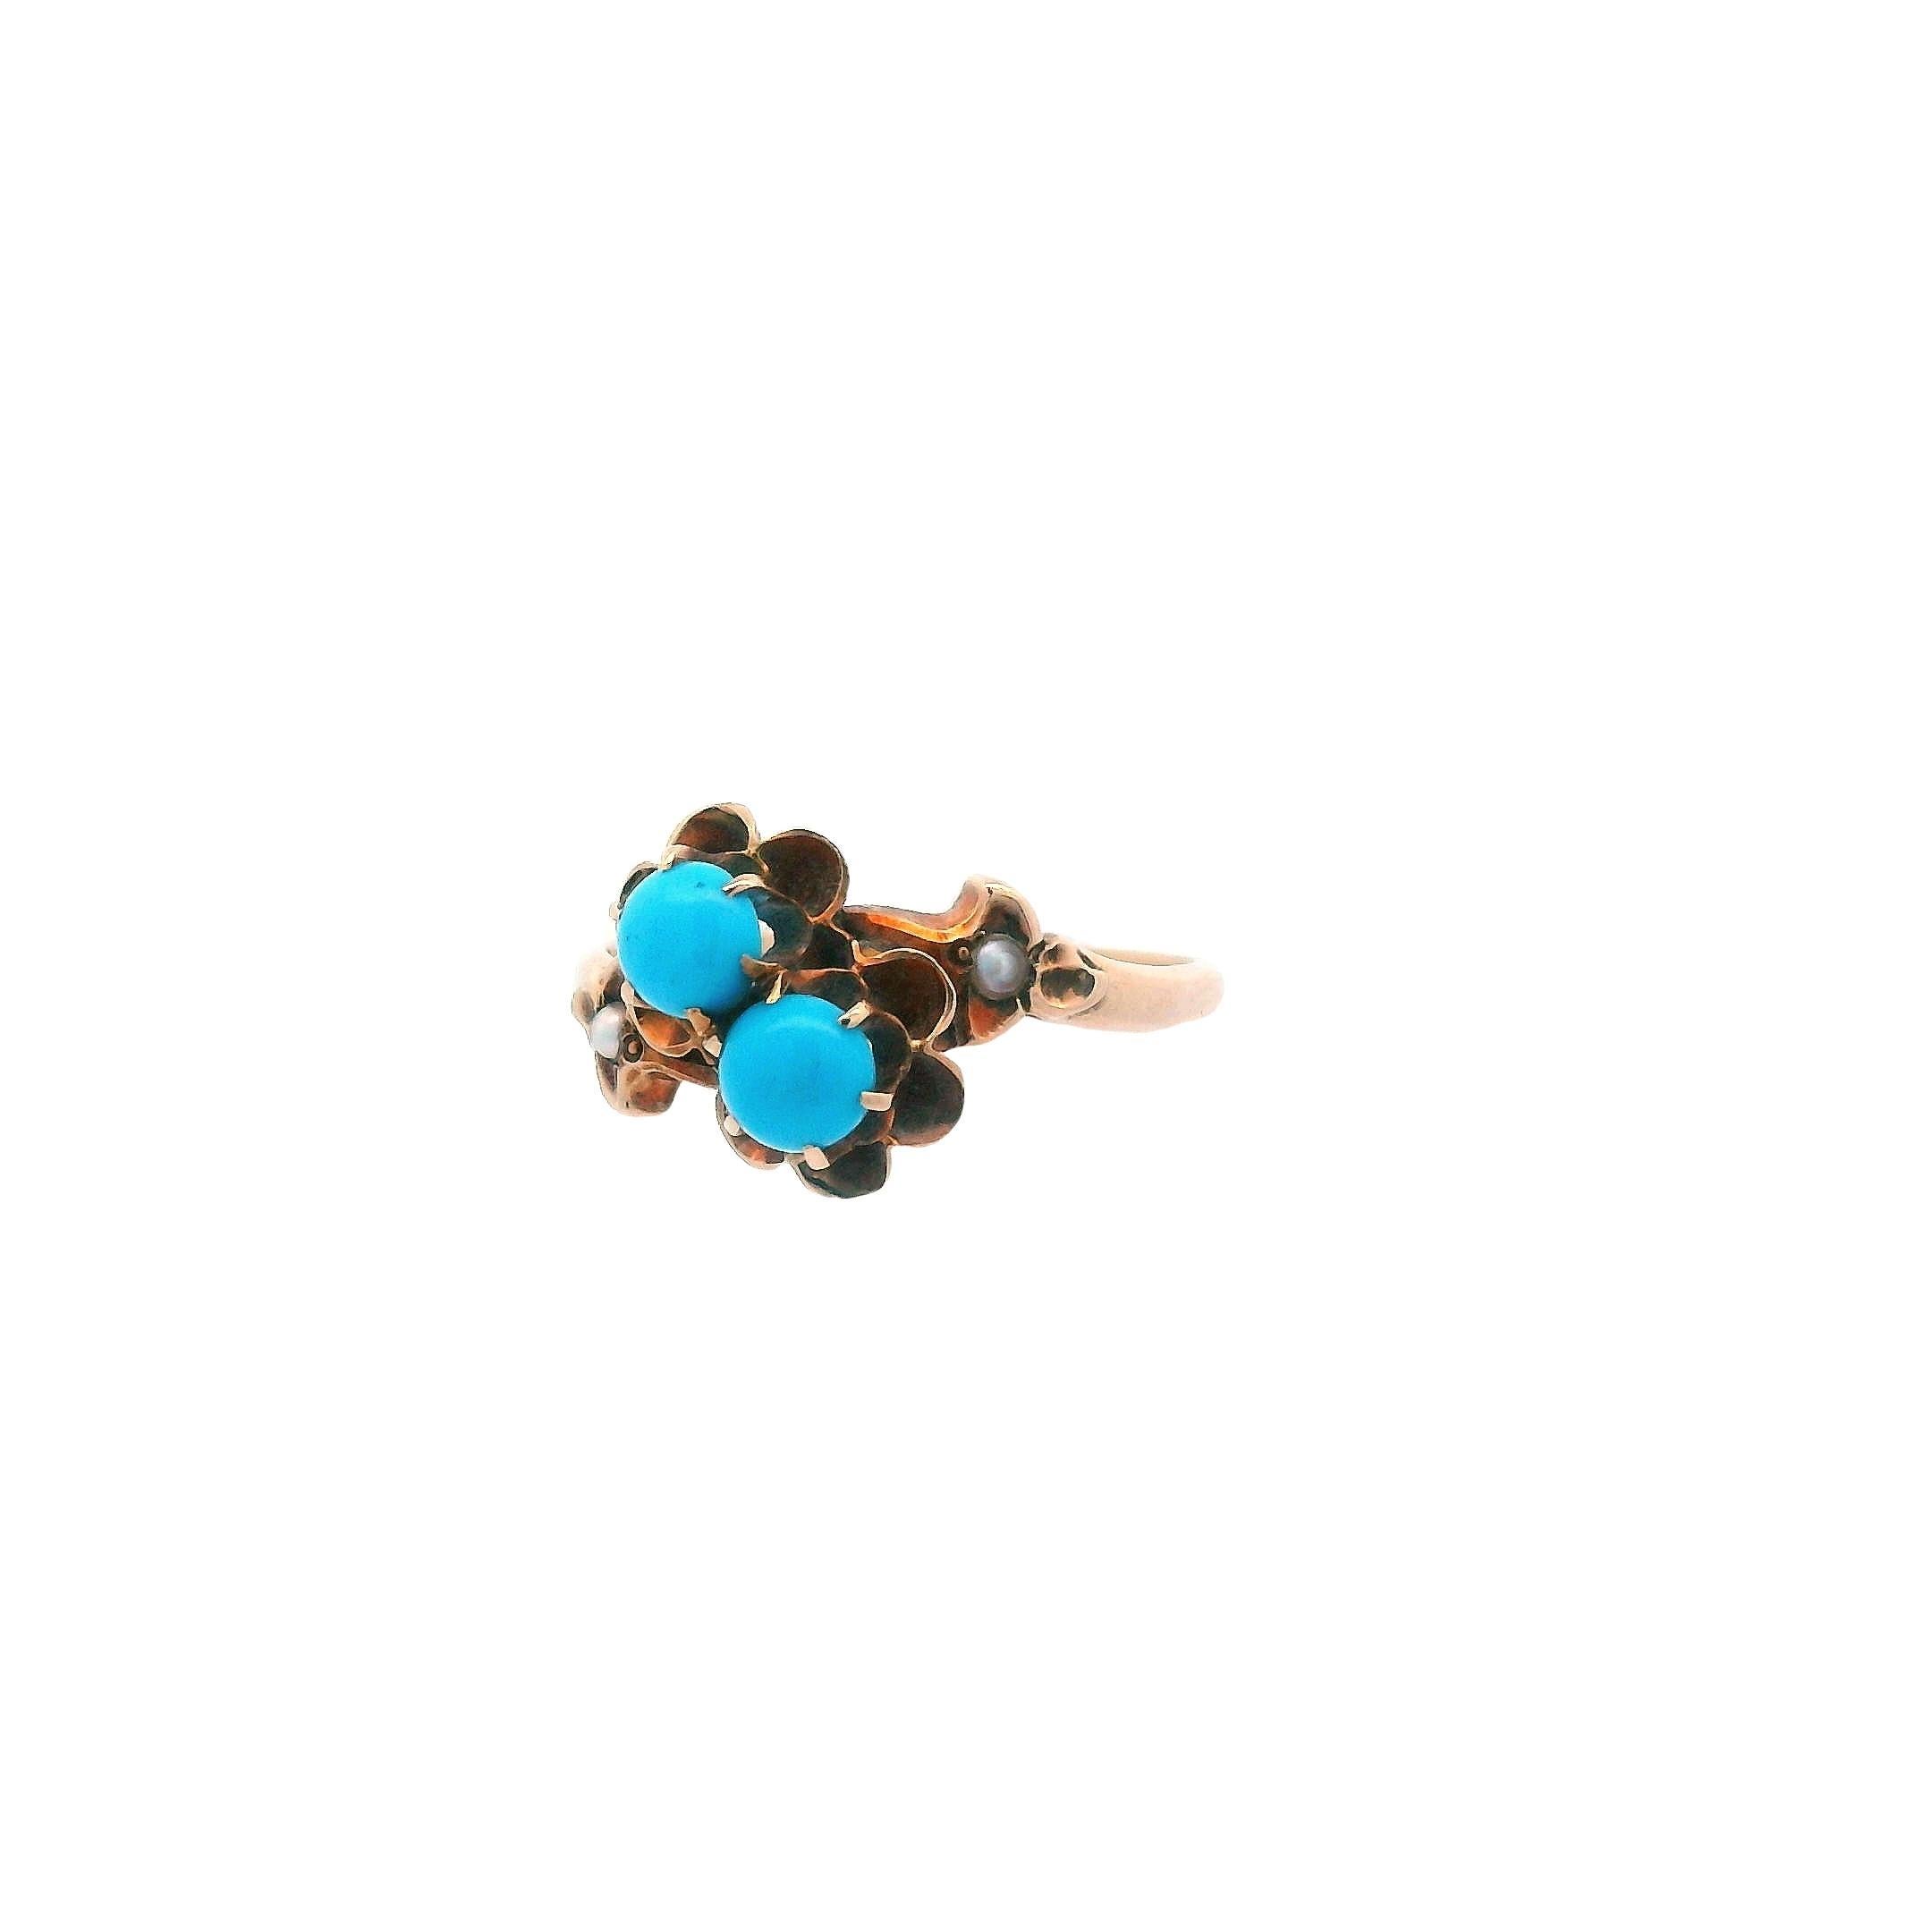 This lovely ring comes from the 1890 Victorian era and is made in 14k yellow gold with both turquoise and seed pearls. This ring is truly special for any lover of turquoise or anyone who enjoys an earth tone ring. The soft turquoise is surrounded by